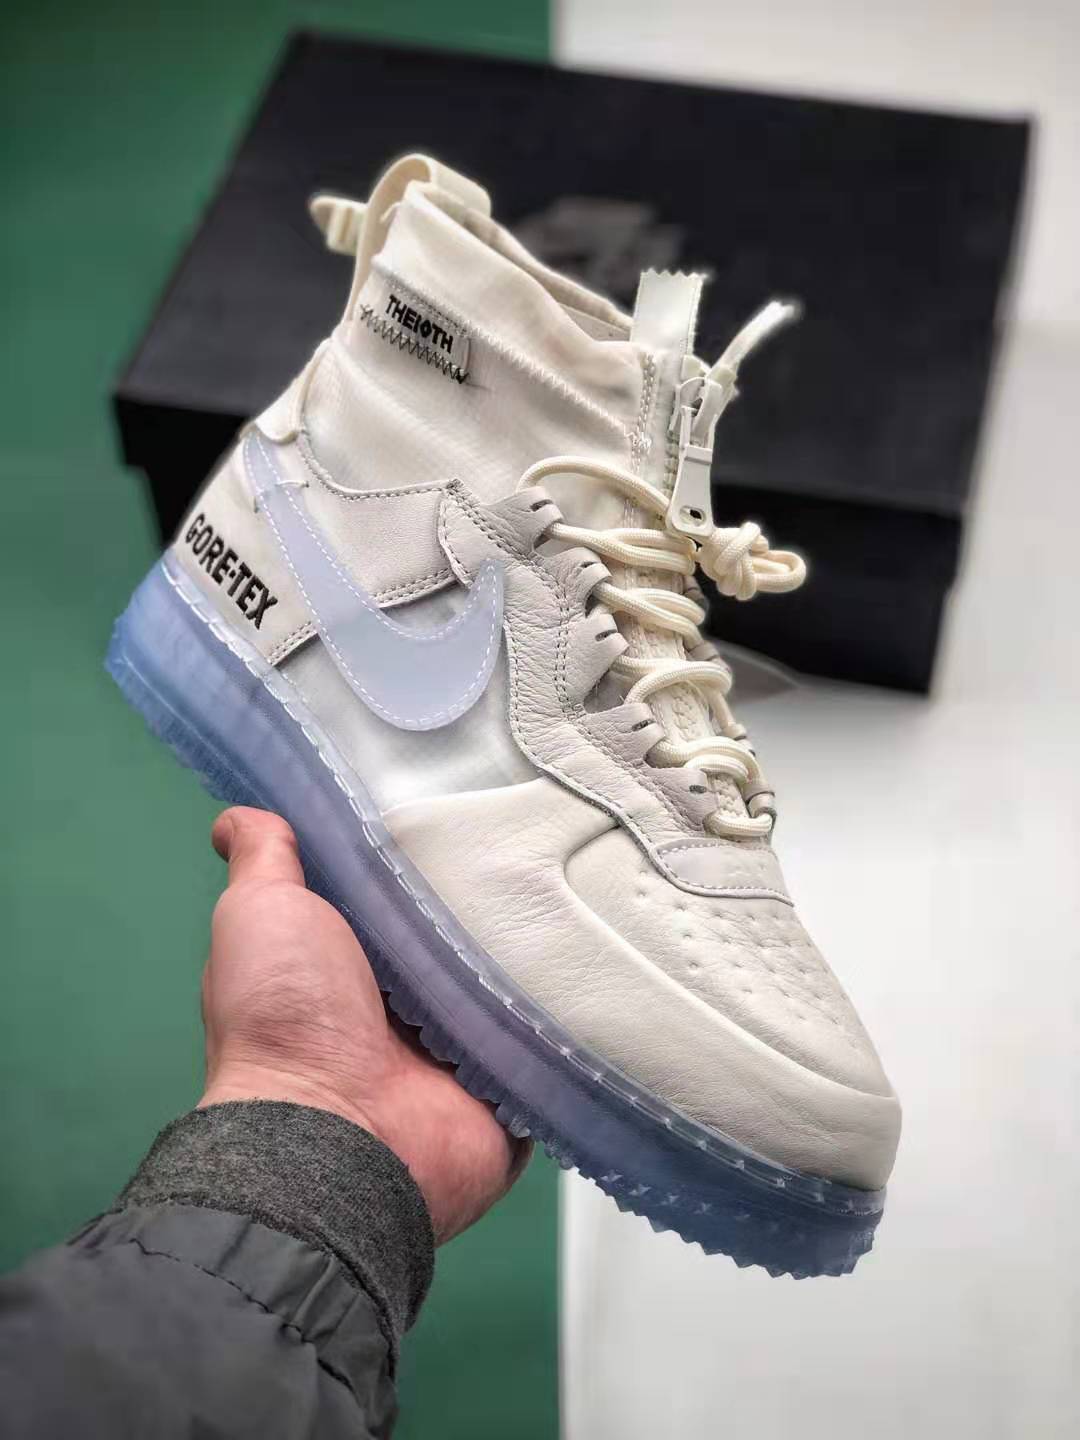 Nike Air Force 1 High Gore-Tex Phantom White CQ7211-002 - Premium Sneakers for All-Weather Comfort